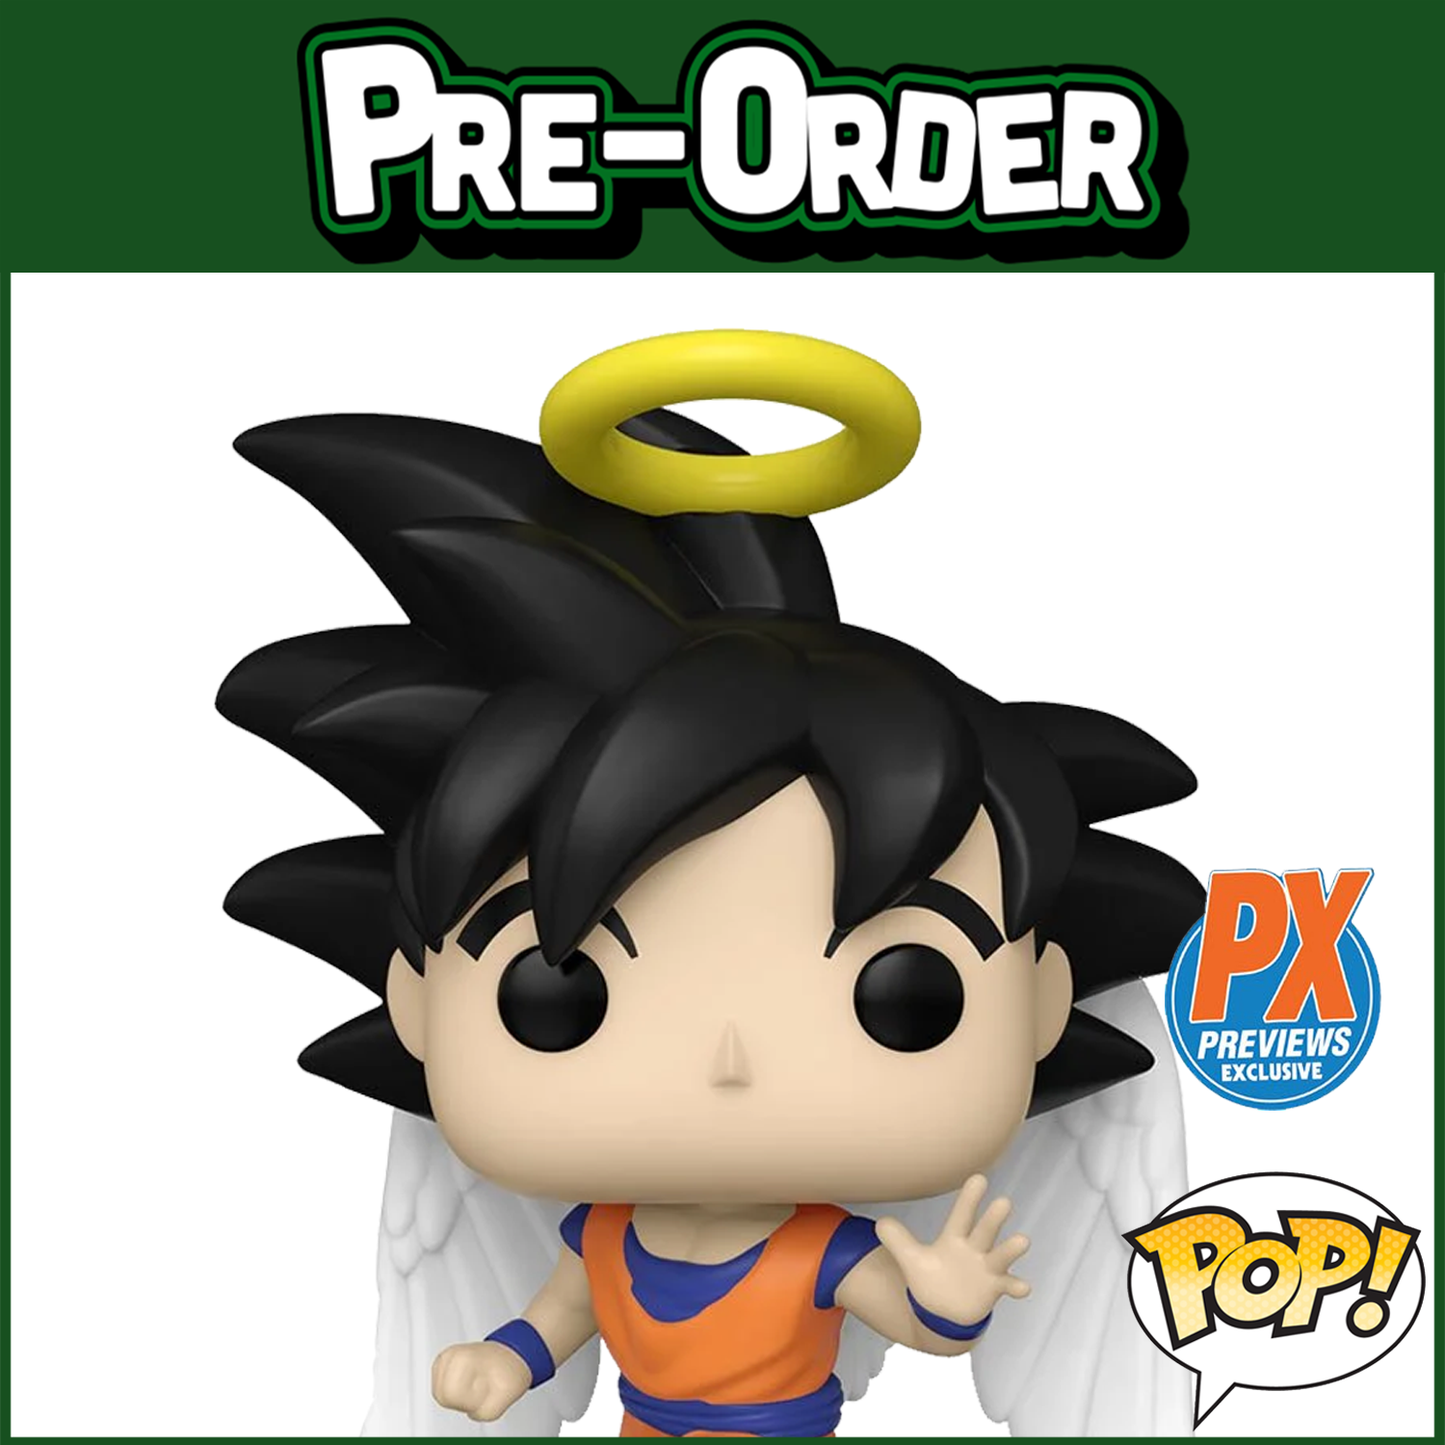 (PRE-ORDER) Funko POP! Animation: DBZ - Goku with Wings (PX Exclusive) #1430